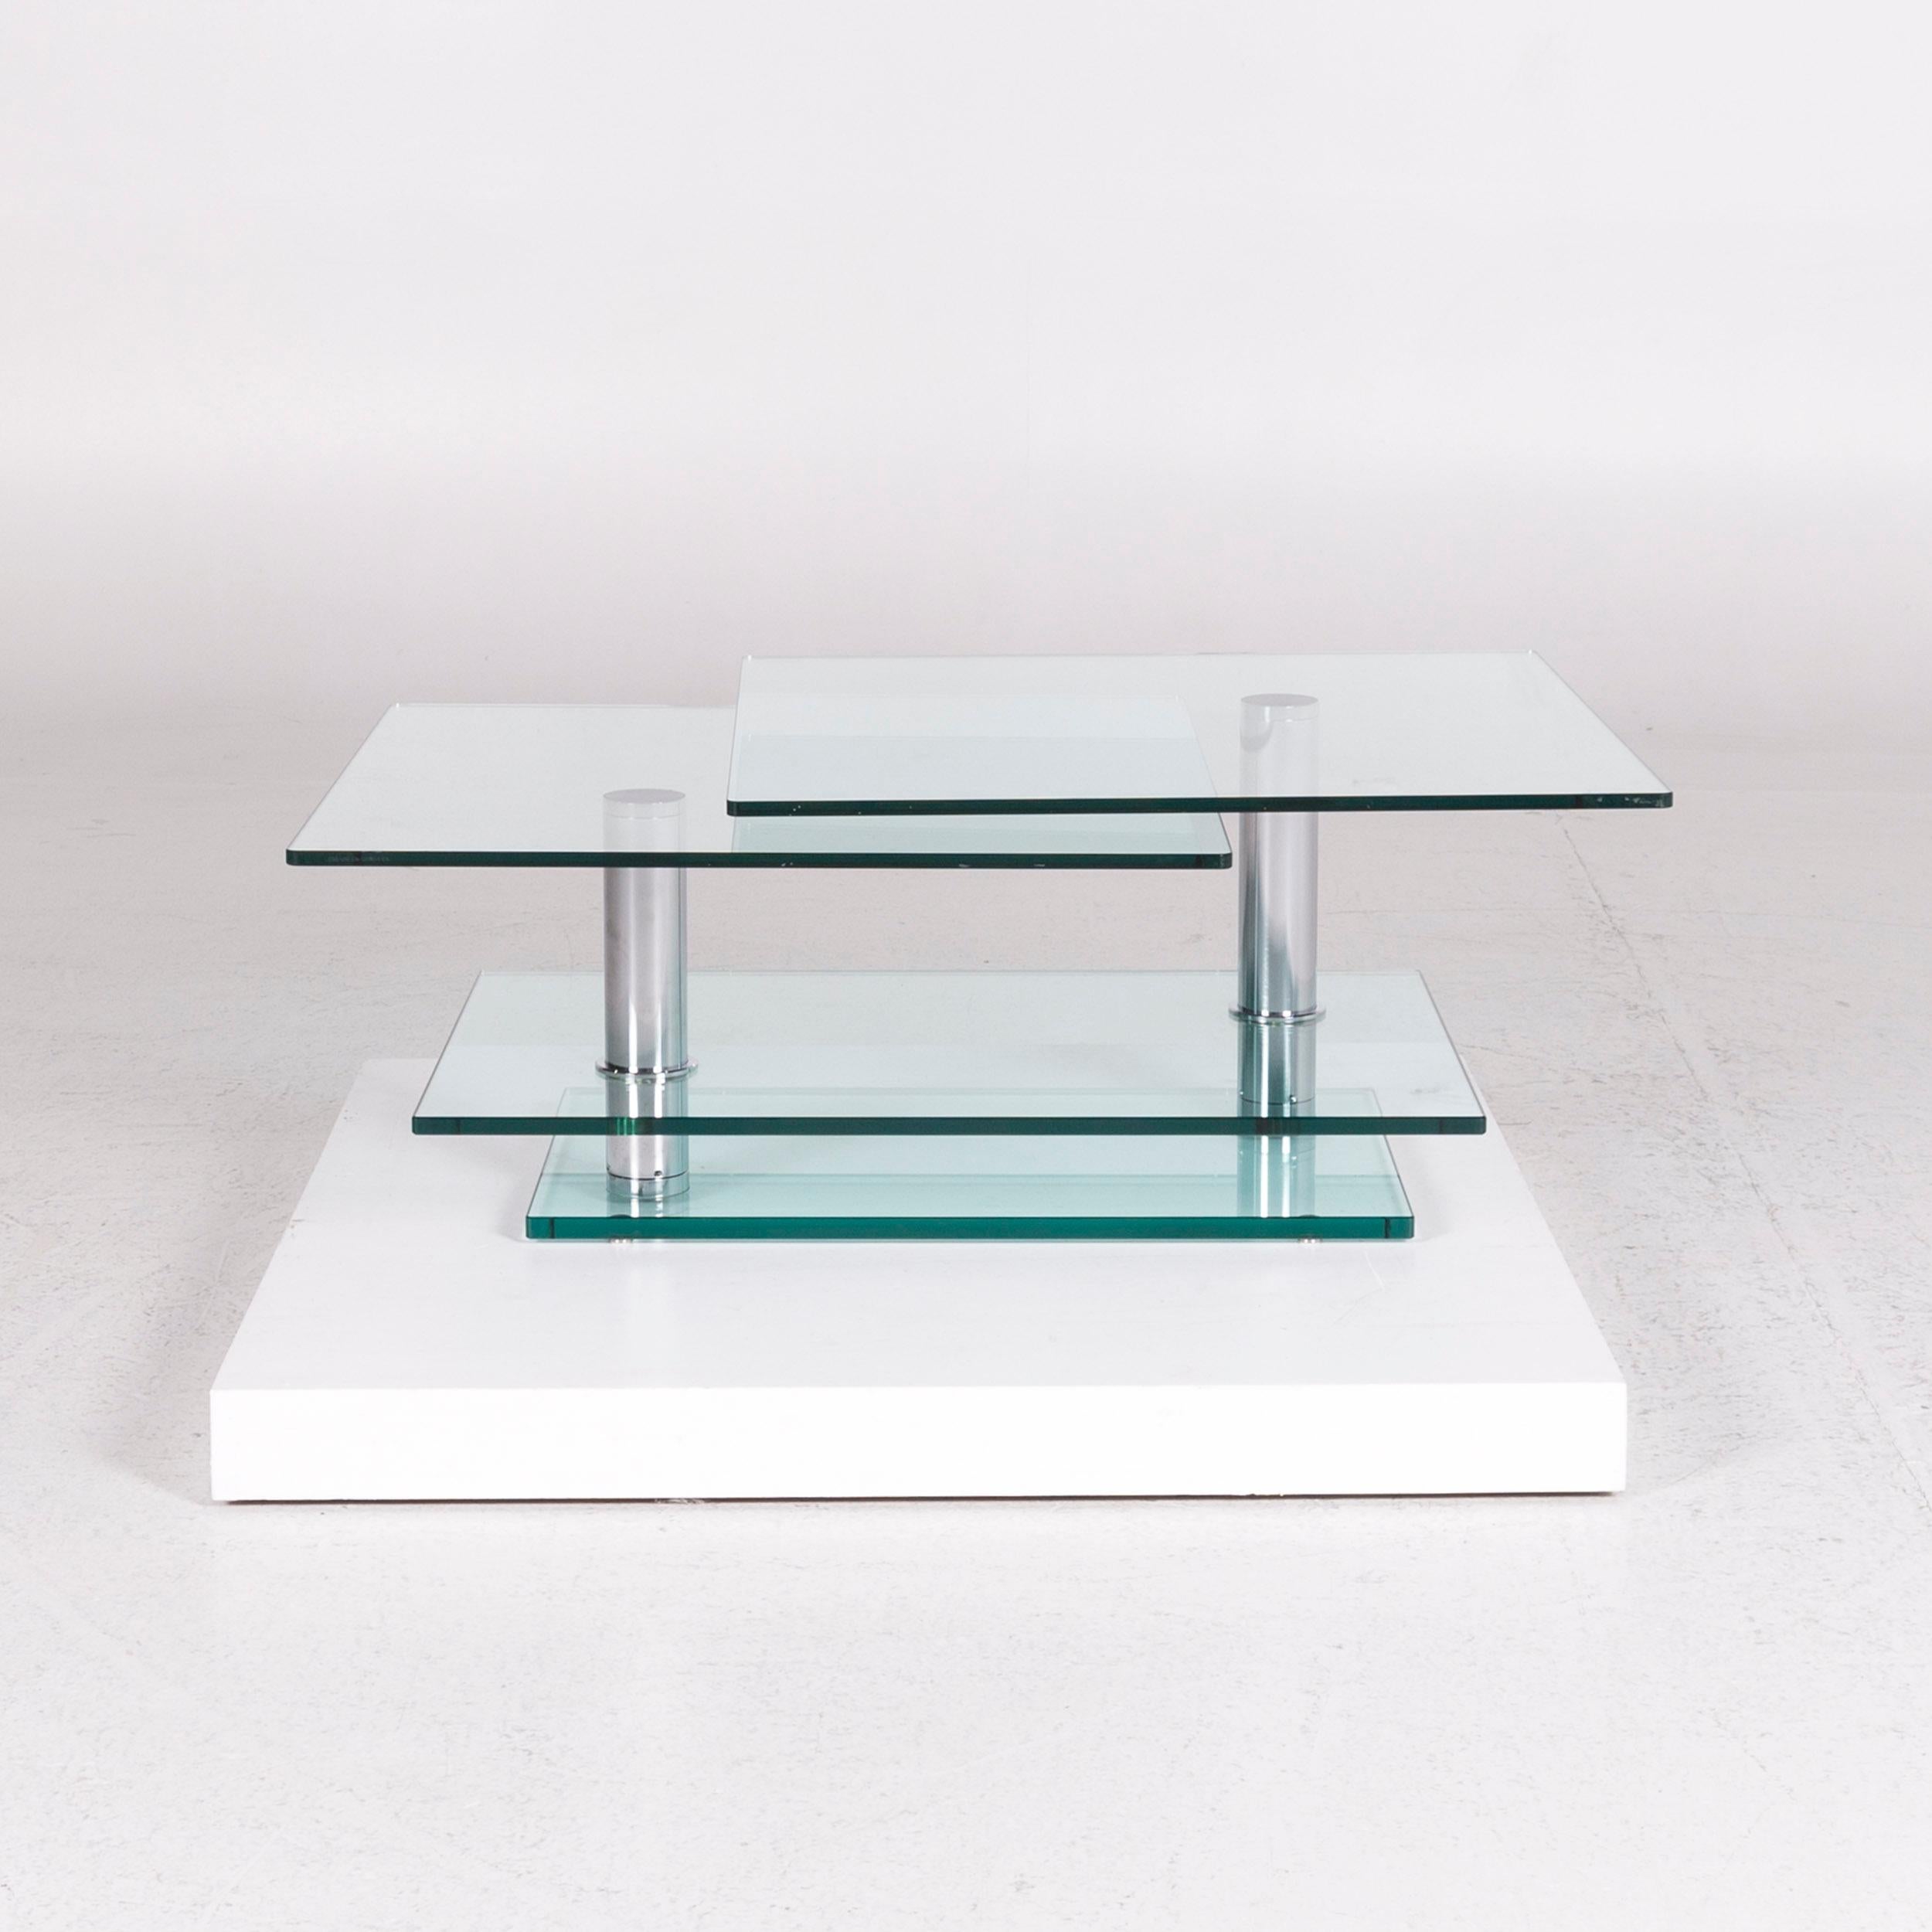 We bring to you a Draenert Imperial glass coffee table function movable table.

 

 Product measurements in centimeters:
 

 Depth 70
 Width 105
 Height 39.





 